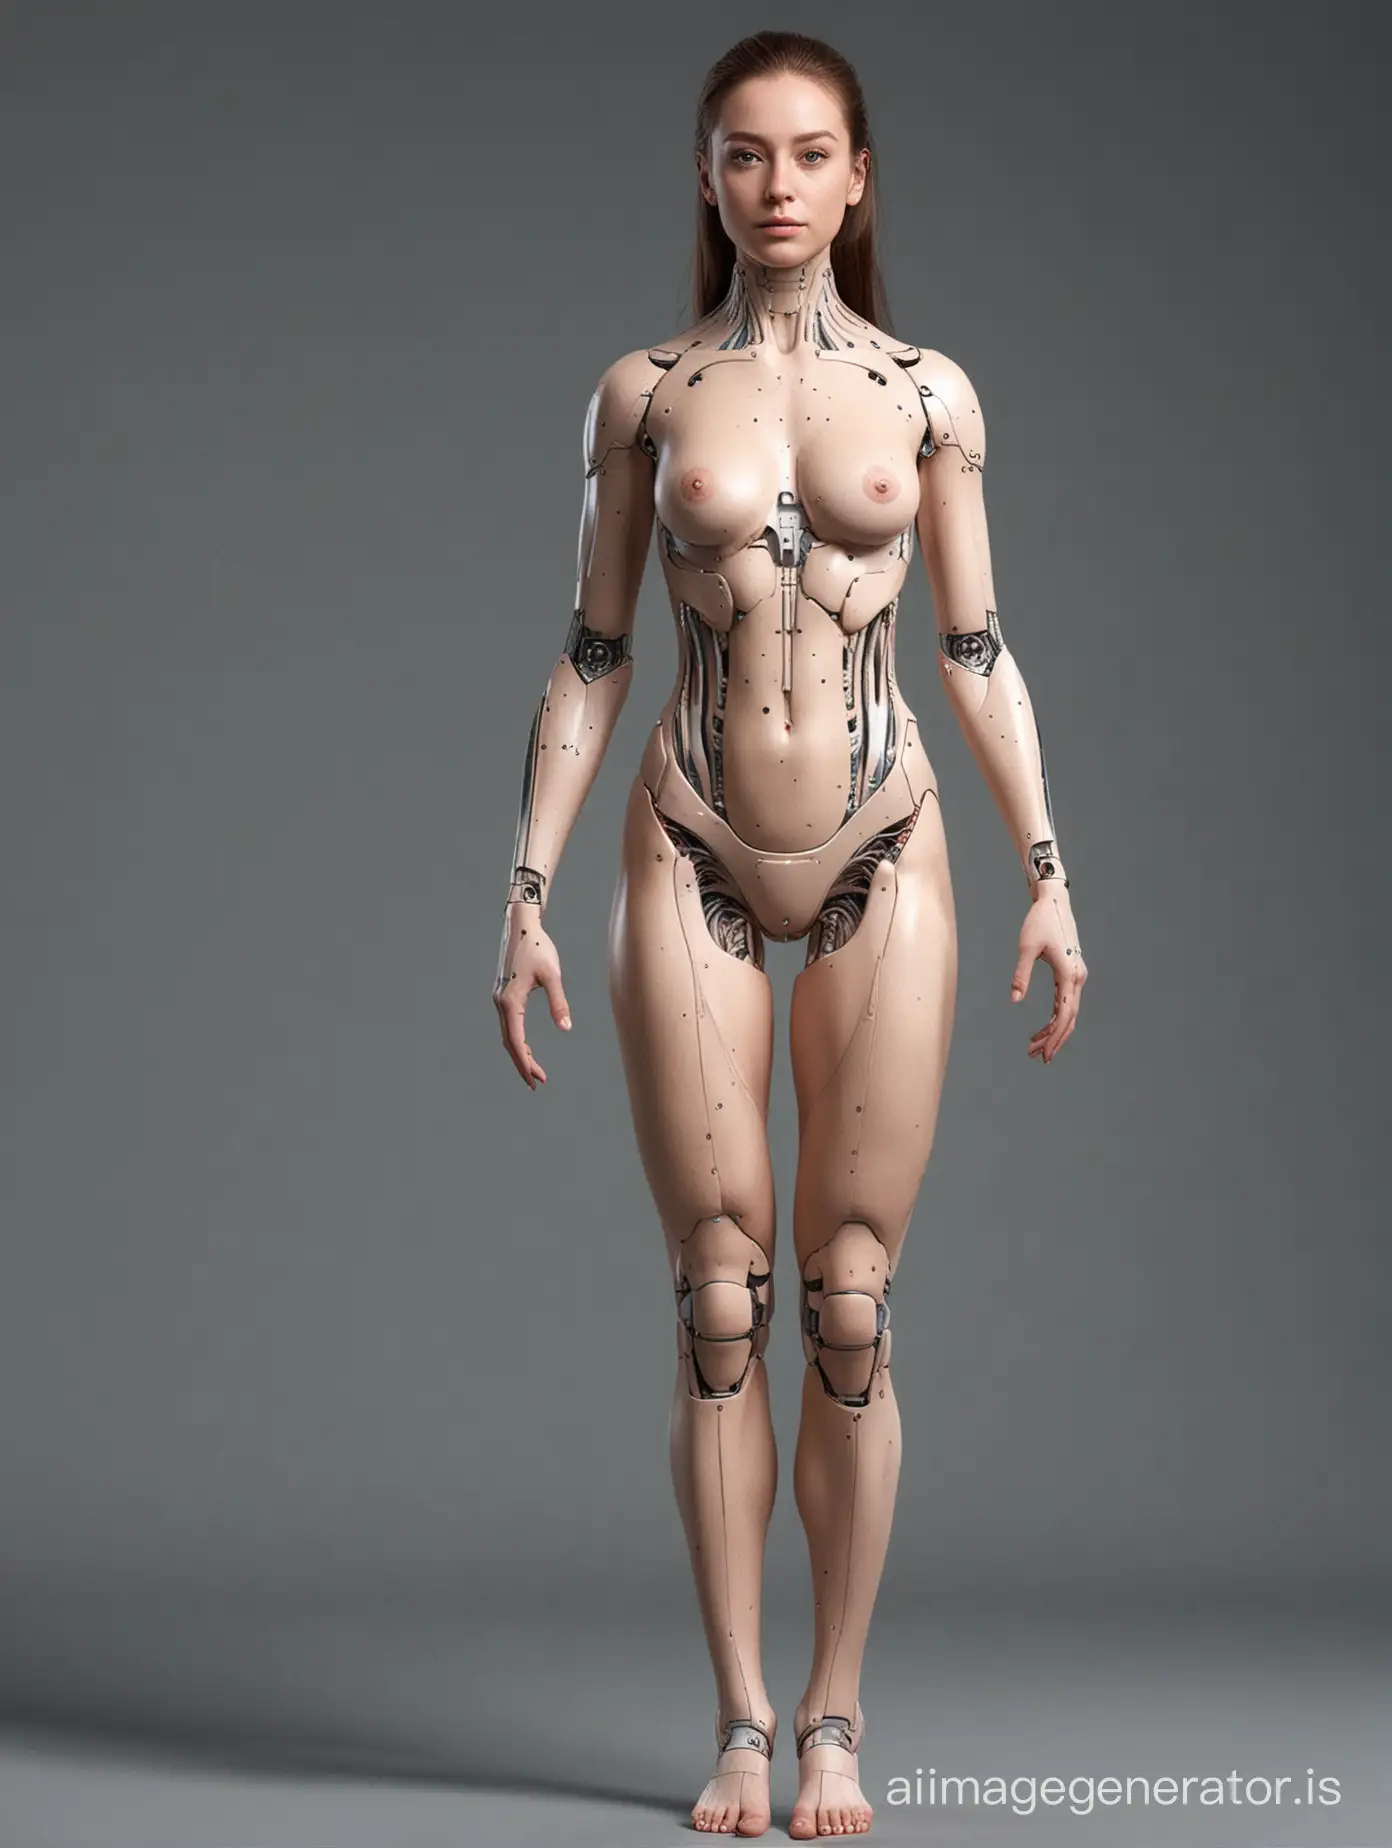 what would an AI look like if it could design its own real human body and form full body capture